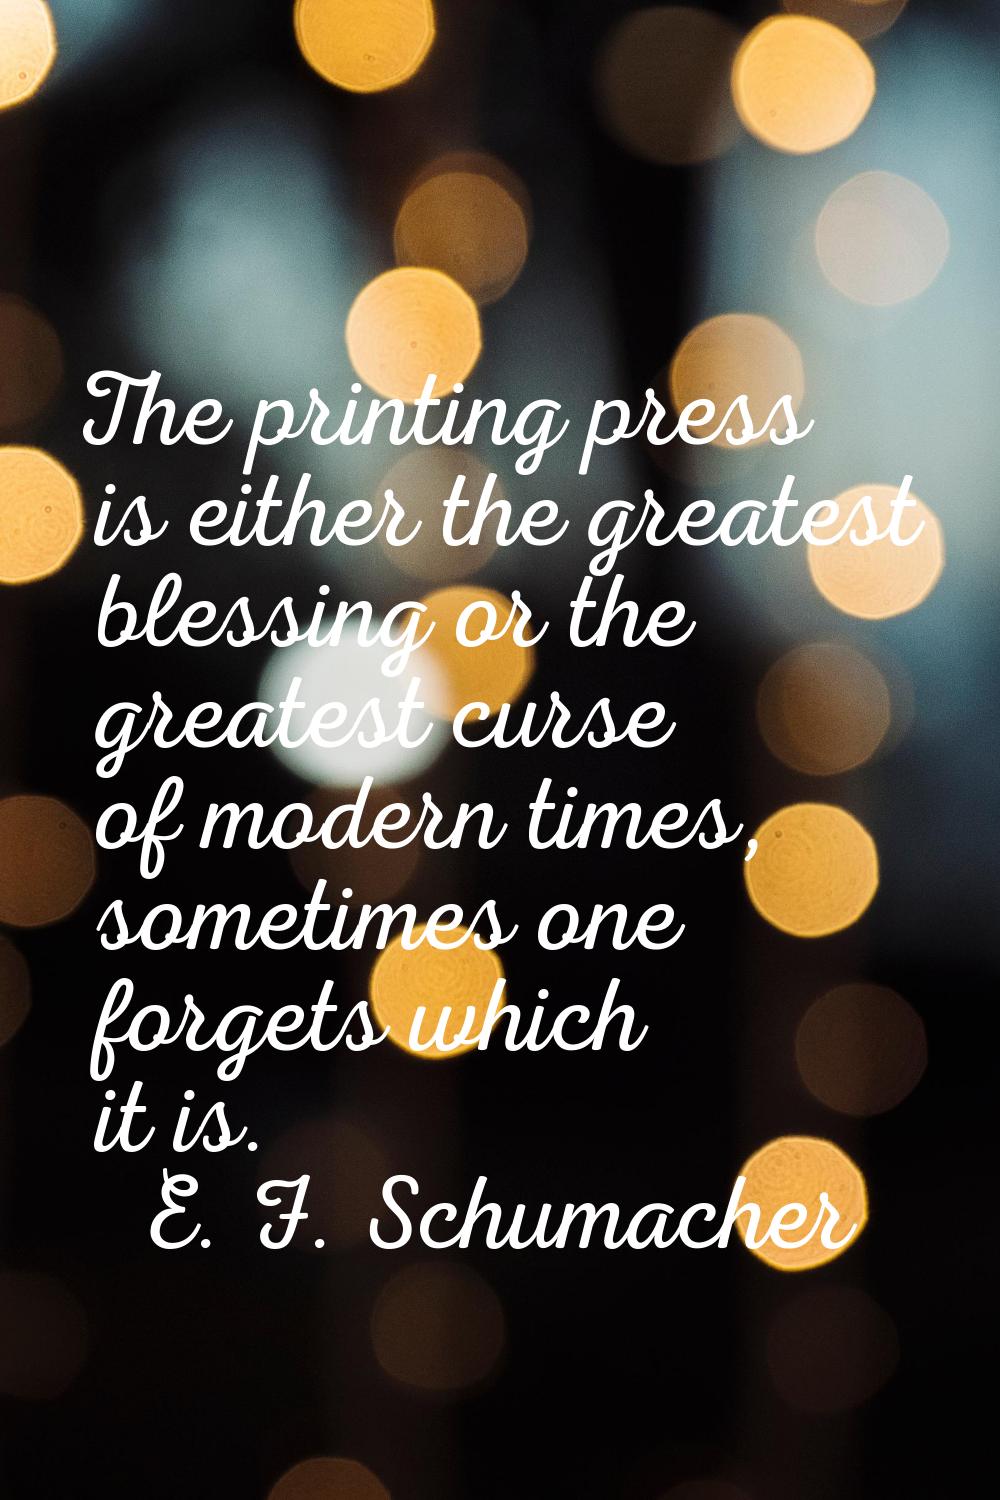 The printing press is either the greatest blessing or the greatest curse of modern times, sometimes